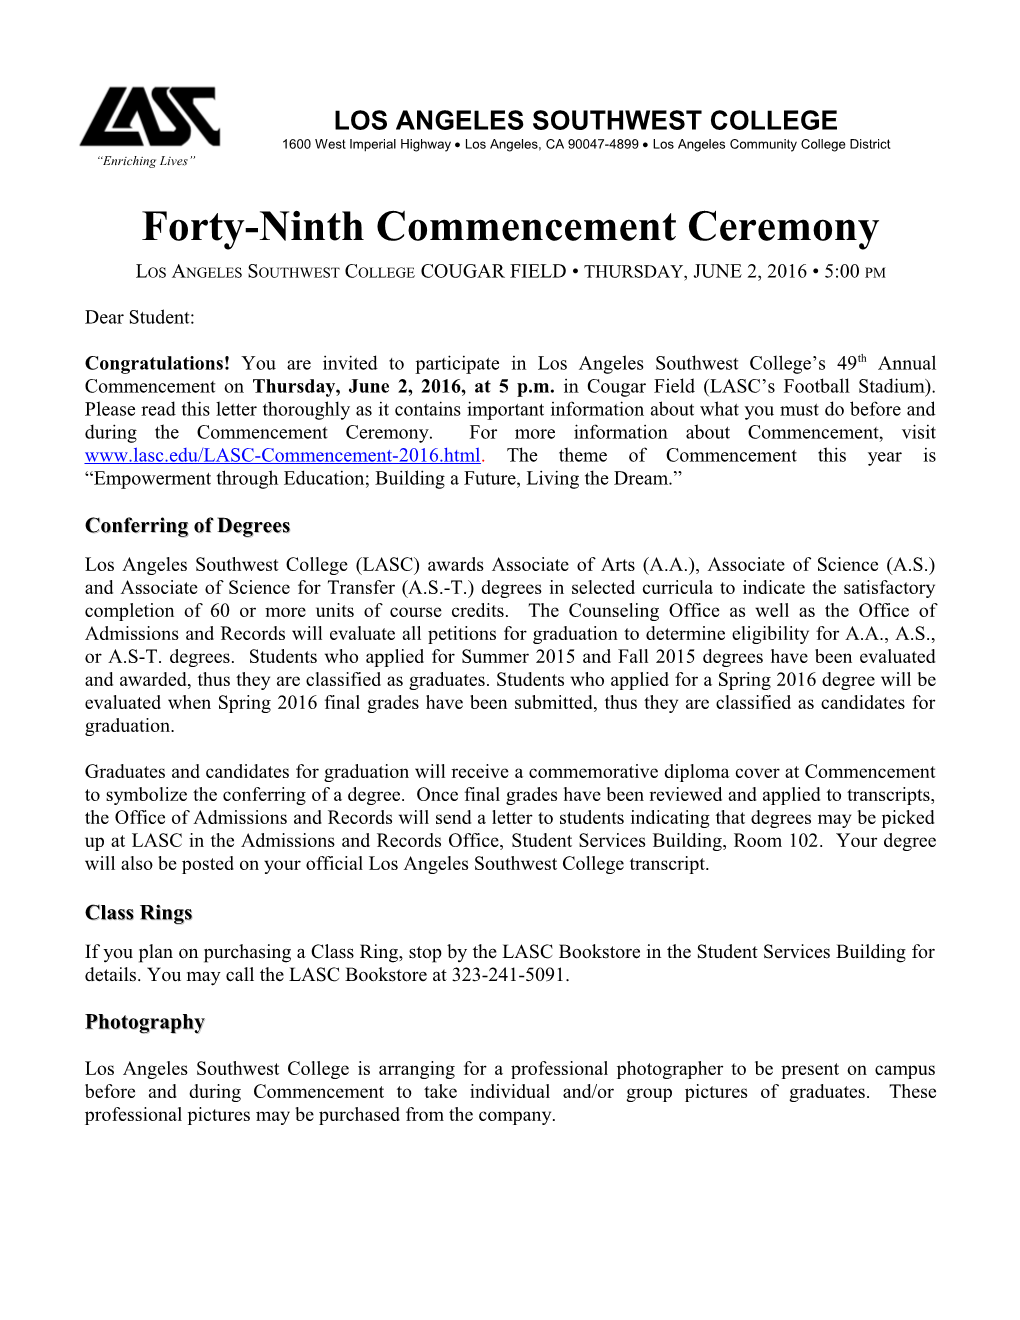 Forty-Ninth Commencement Ceremony